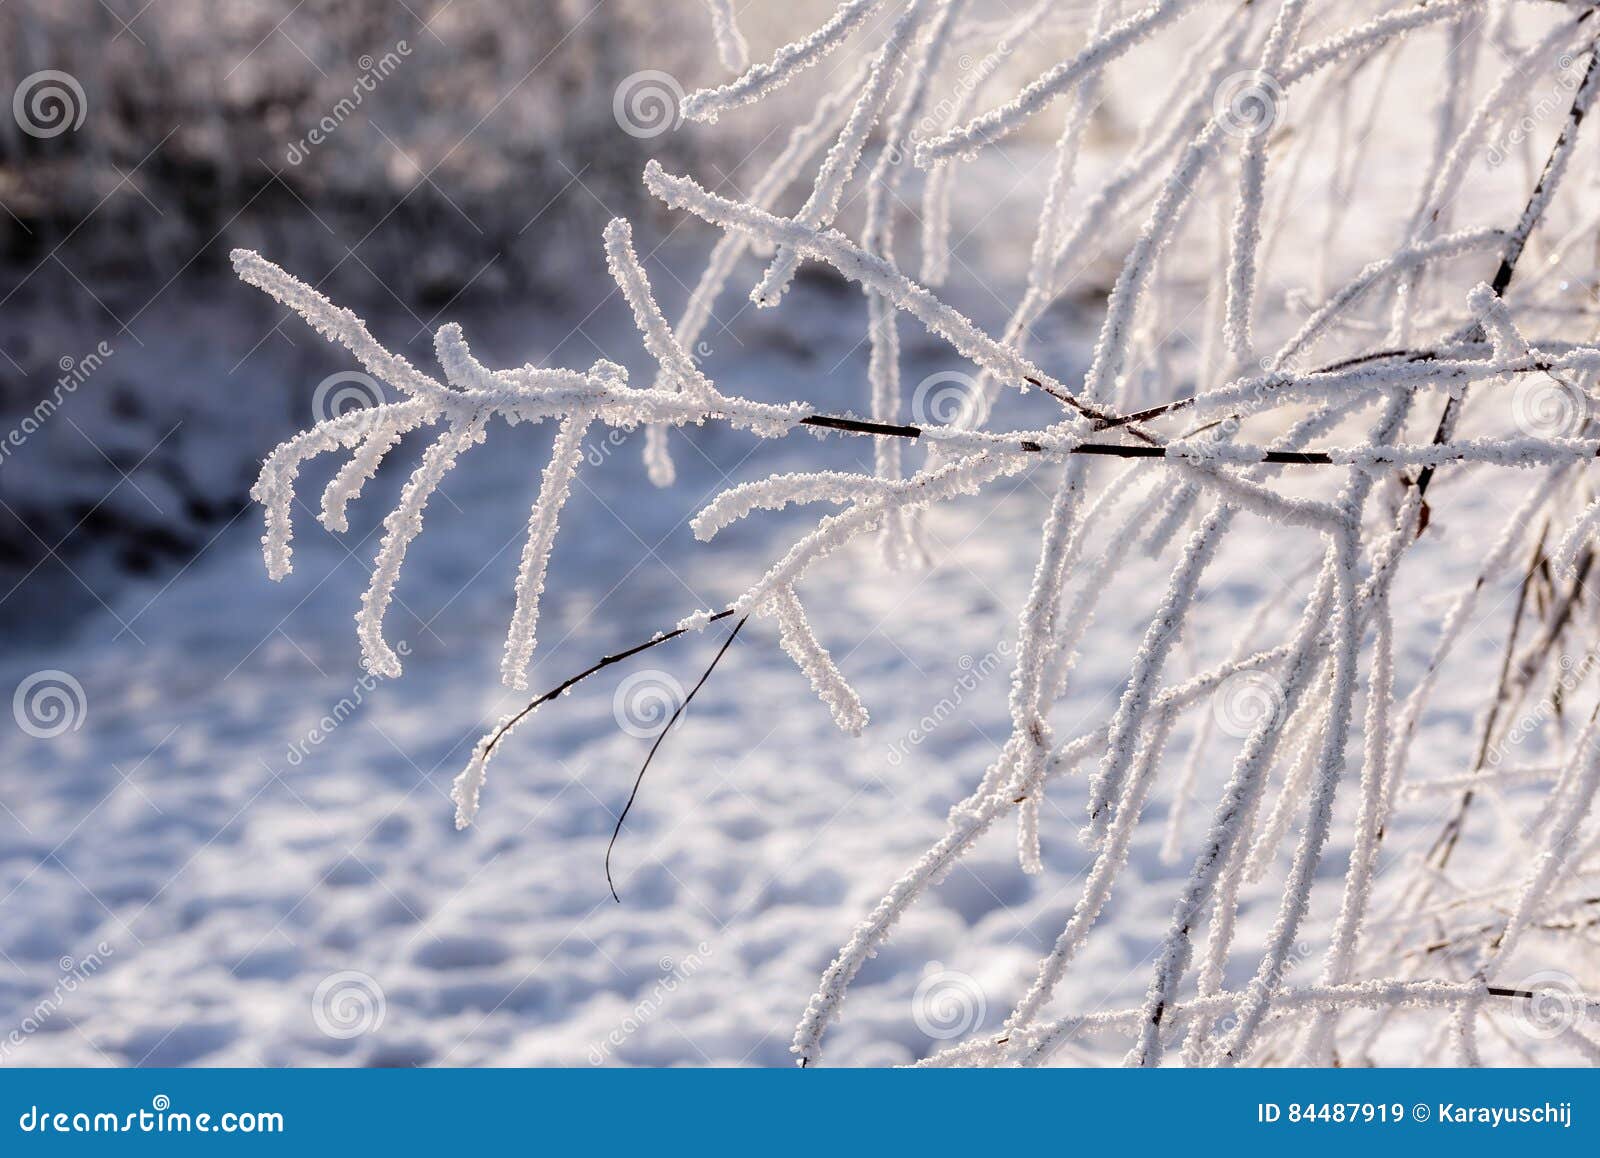 Branch of Weeping Willow Covered by Snow and Frost in Winter Stock ...